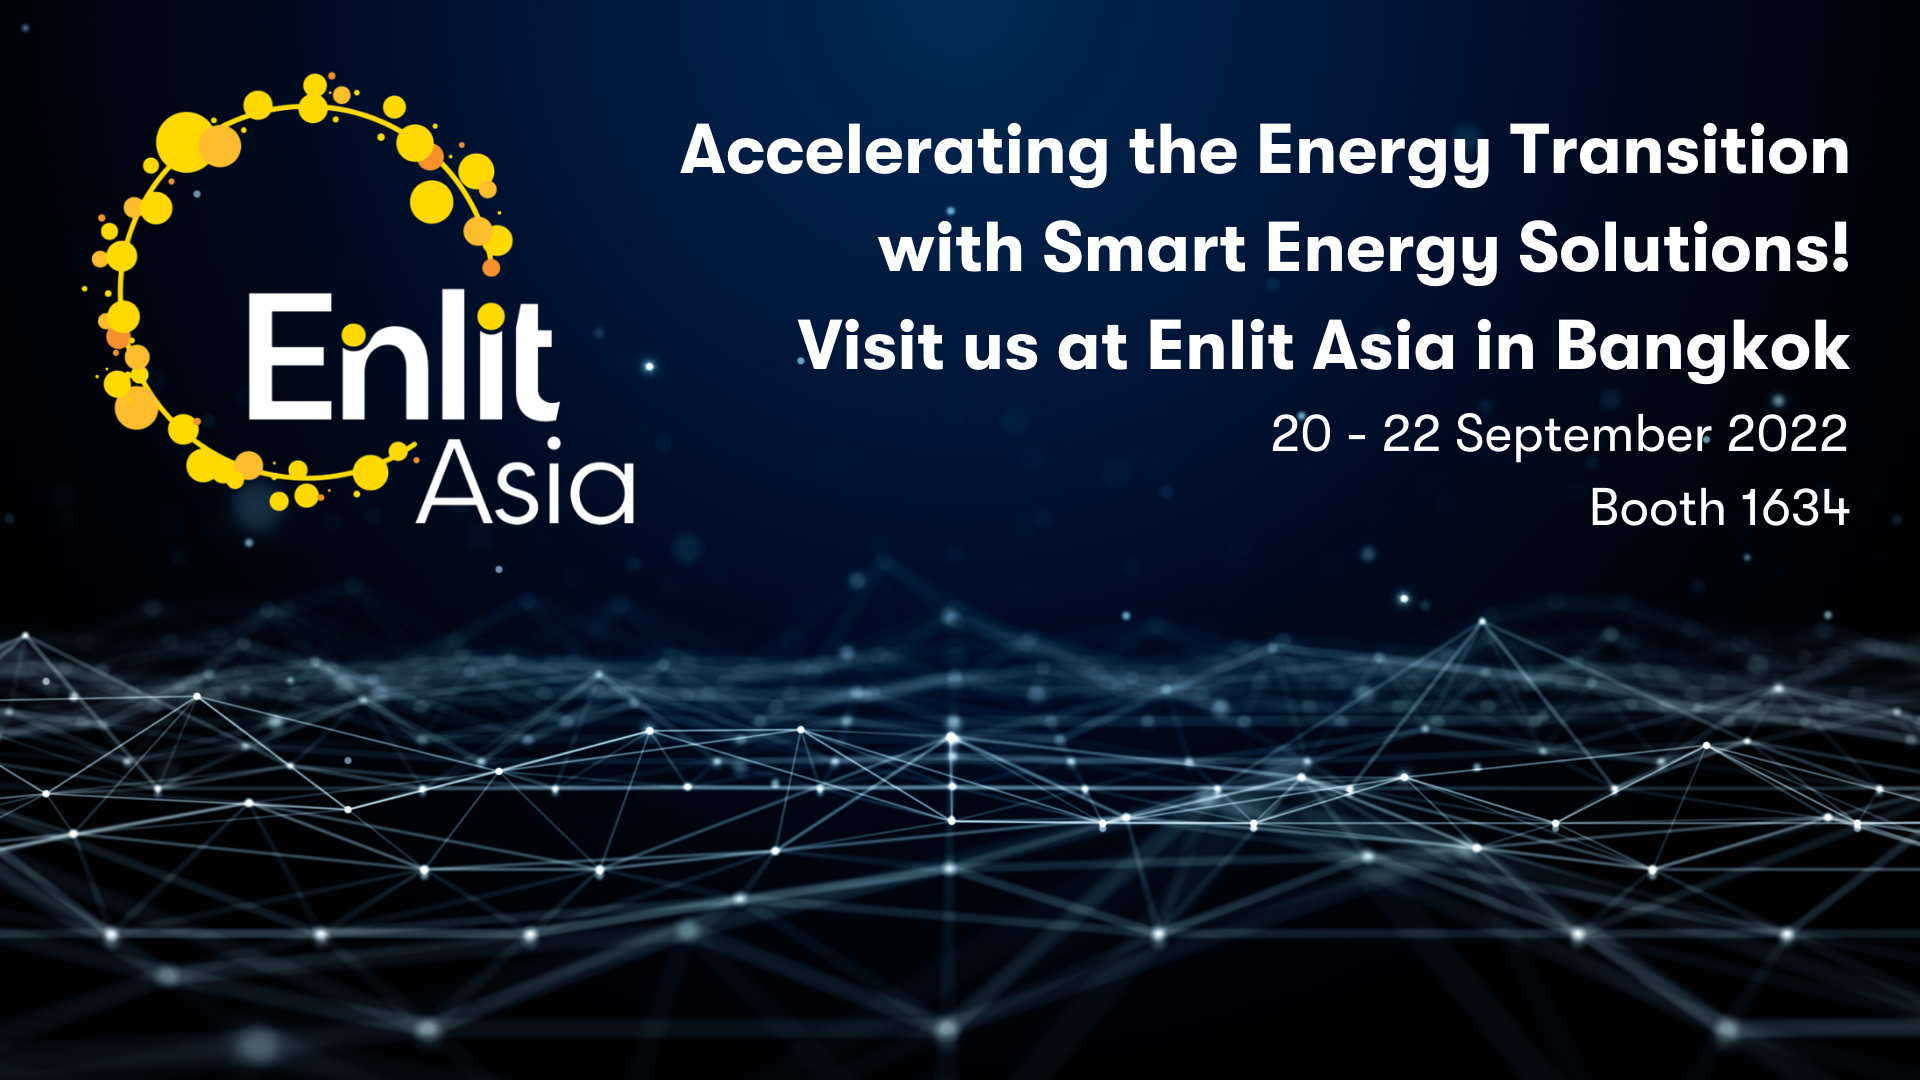 uploads/pics/https://waste-to-energy.iqony.energy/uploads/pics/Accelerating_the_Energy_Transition_with_Smart_Digital_Solutions_Visit_us_at_Enlit_Asia_in_Bangkok__1__10.png